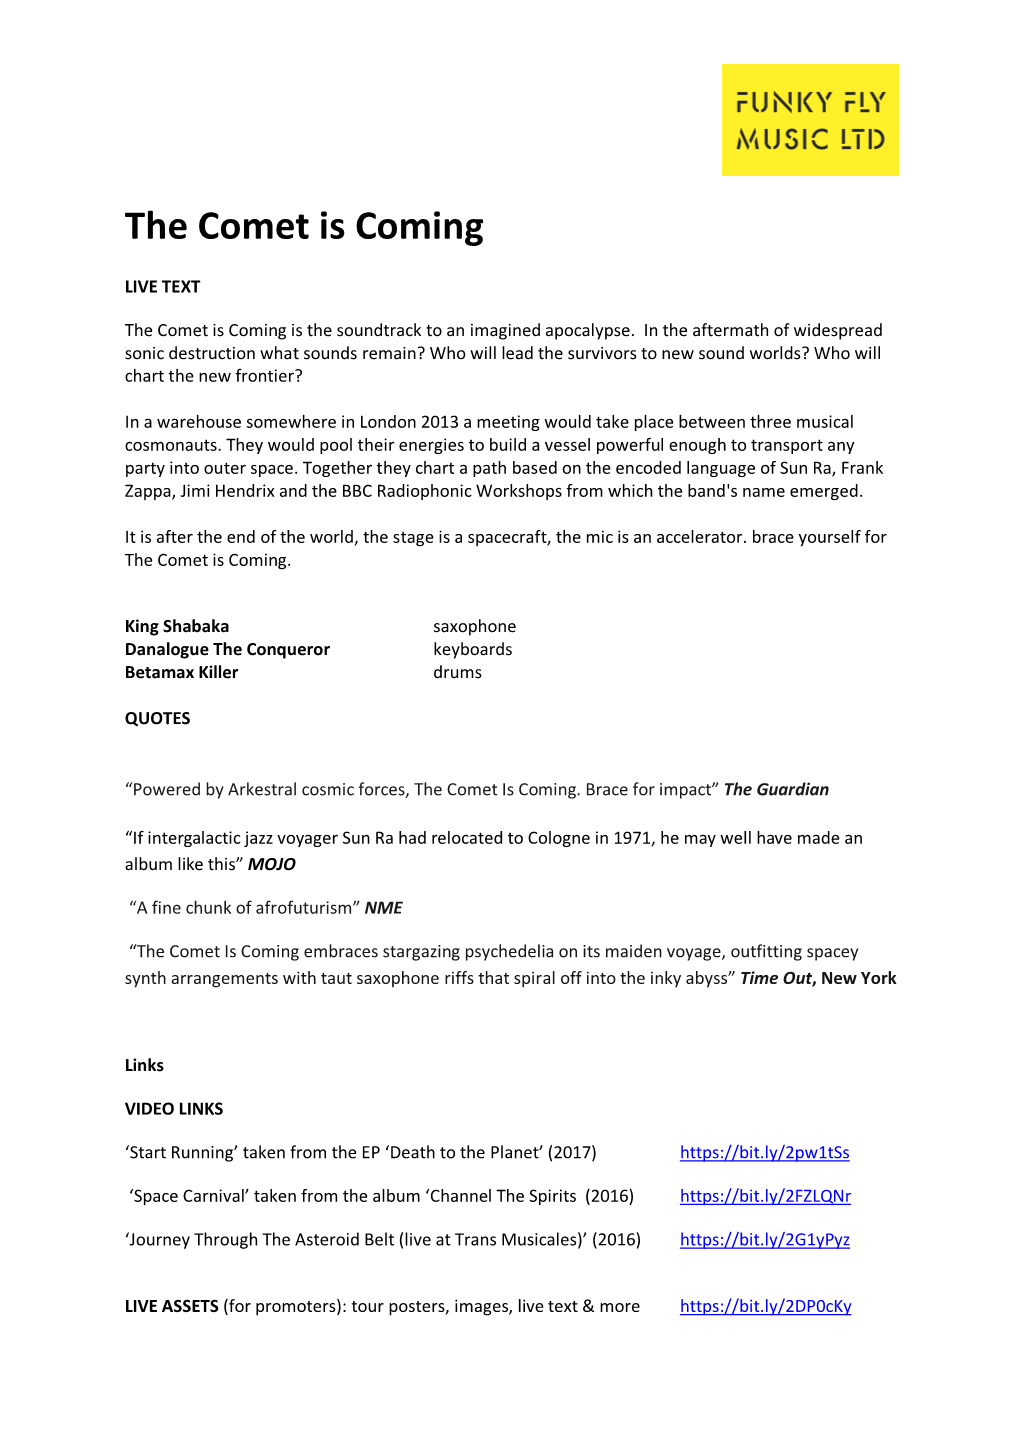 The Comet Is Coming Promo Info